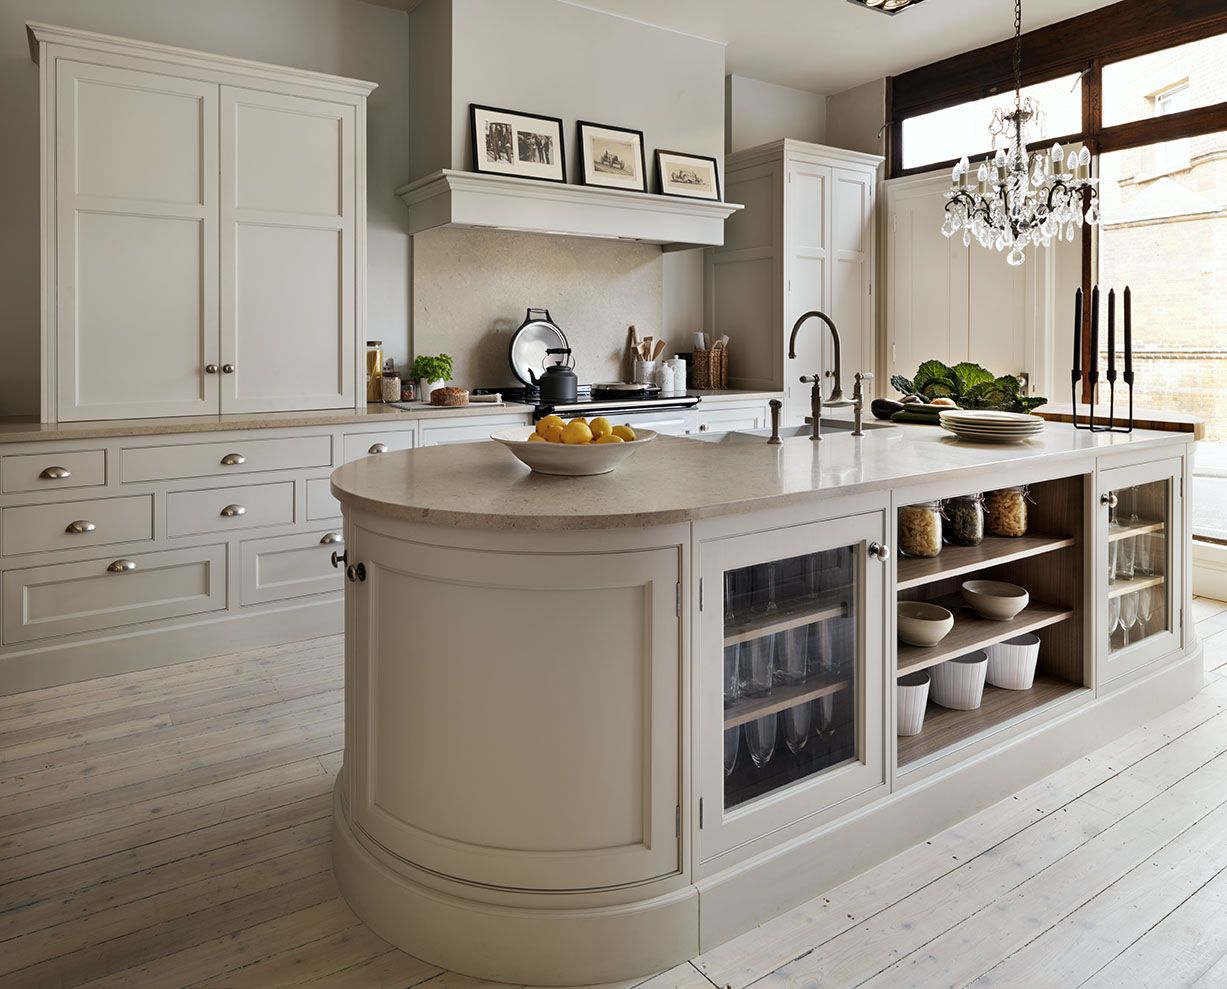 Beige Kitchen Cabinets - 3 Perfect Ideas for a Fascinating Interior